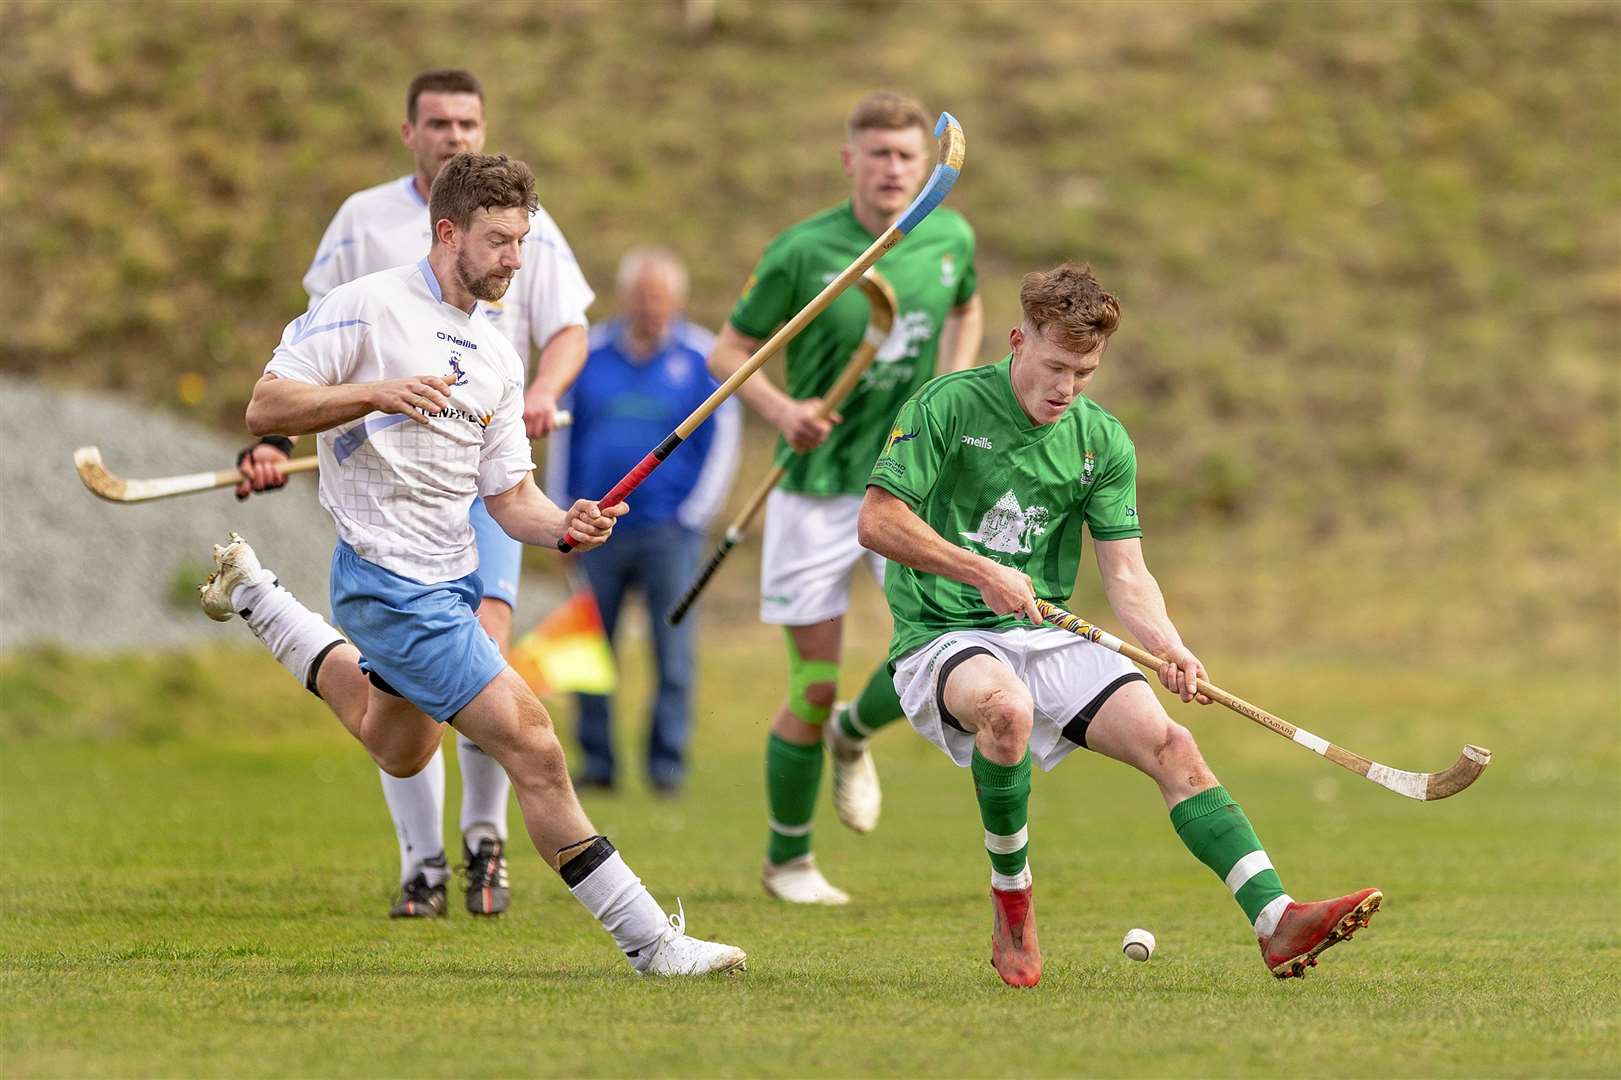 Ryan Mackay (Beauly) with Neil MacVicar (Skye). Skye Camanachd v Beauly in the cottages.com MacTavish Cup quarter final, played at Pairc nan Laoch, Portree.